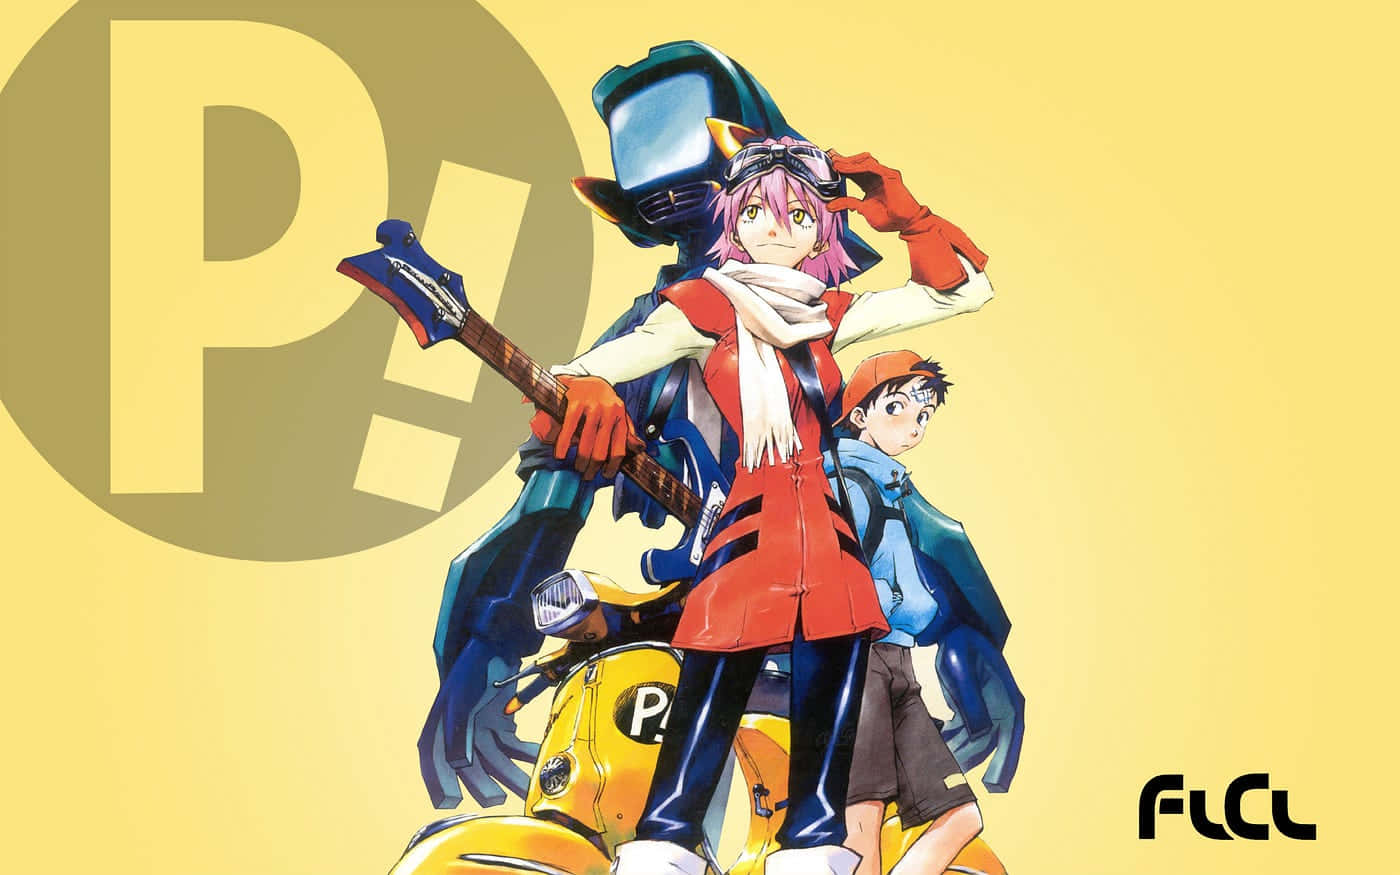 Haruko Haruhara, the yellow power-guitar wielding alien, from the beloved anime FLCL.